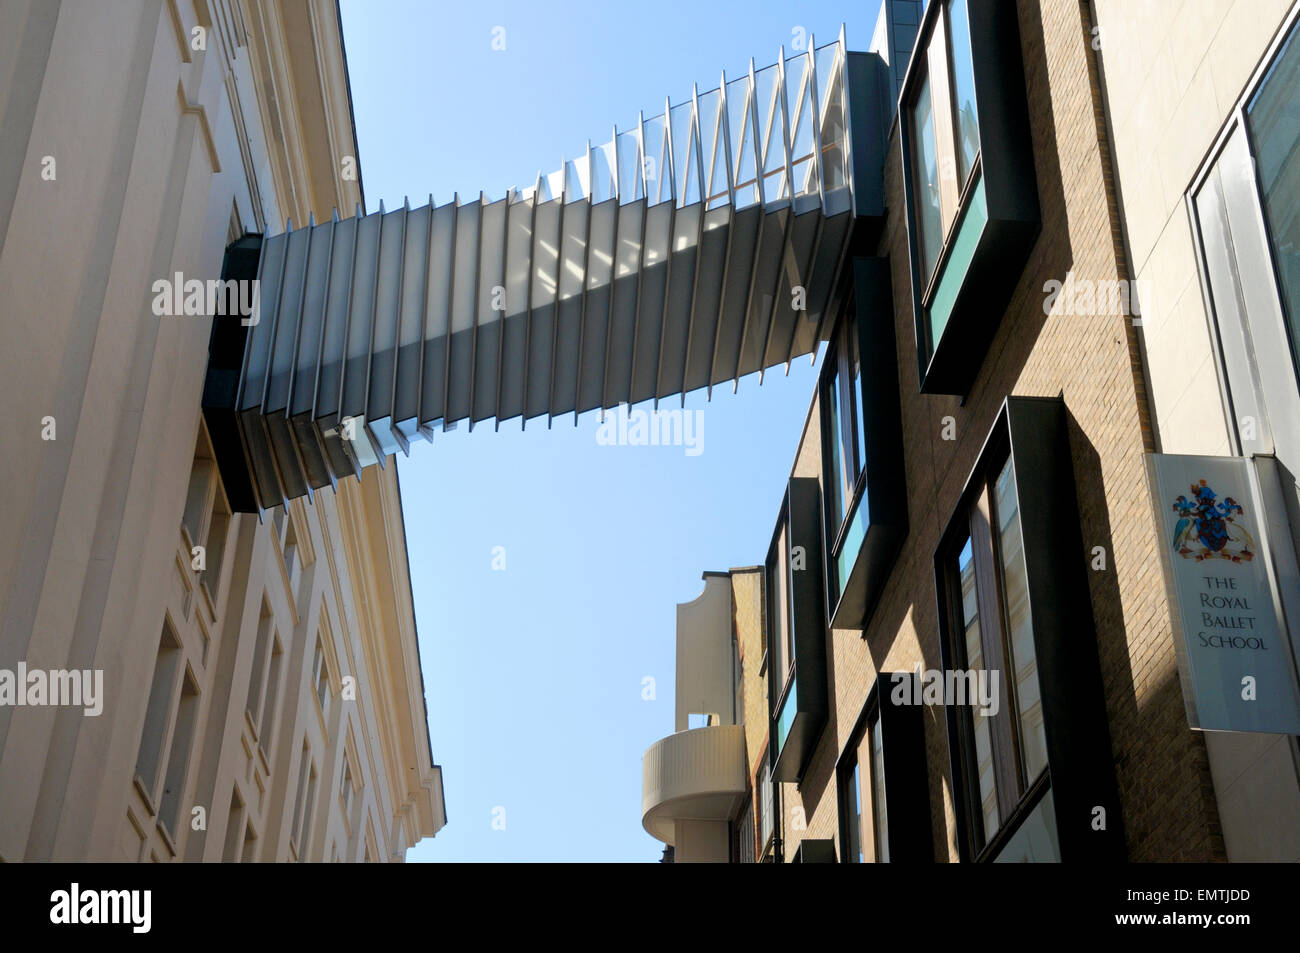 London, England, UK. 'Bridge of Aspiration' between the Royal Ballet School and the Royal Opera House in Floral Street. (2003) Stock Photo